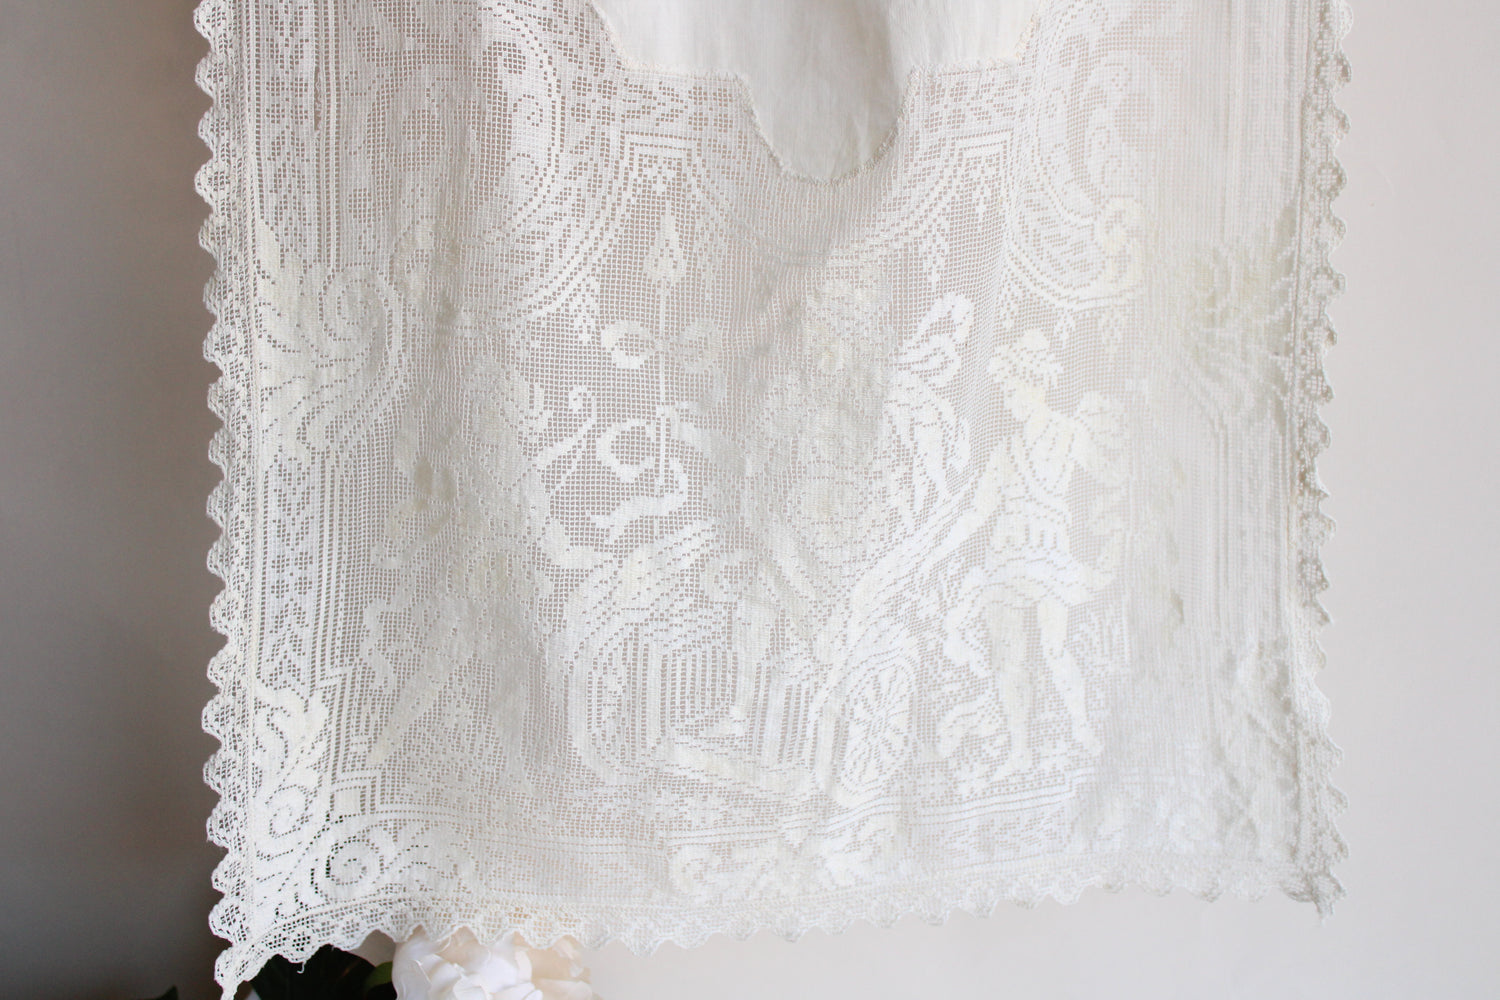 Antique 190s 1920s Lace Table Runner with a Greek theme